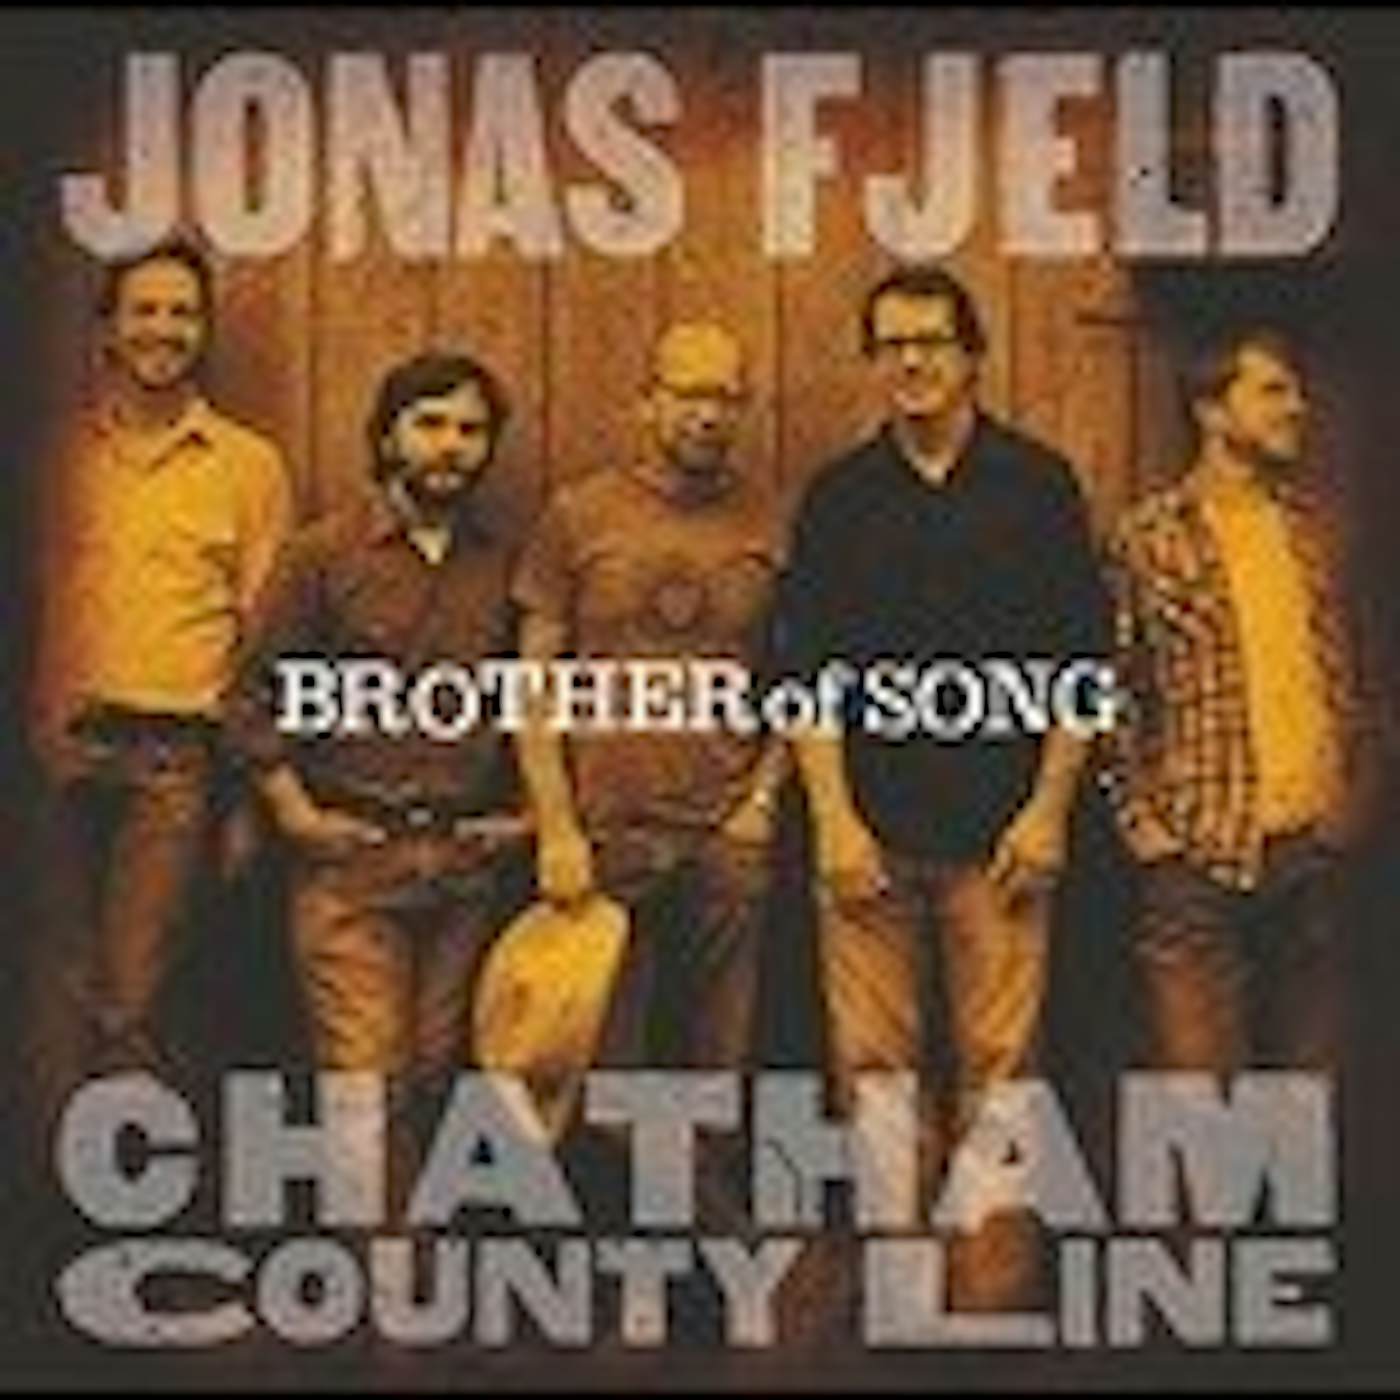 Jonas Fjeld & Chatham County Line BROTHER OF SONG CD